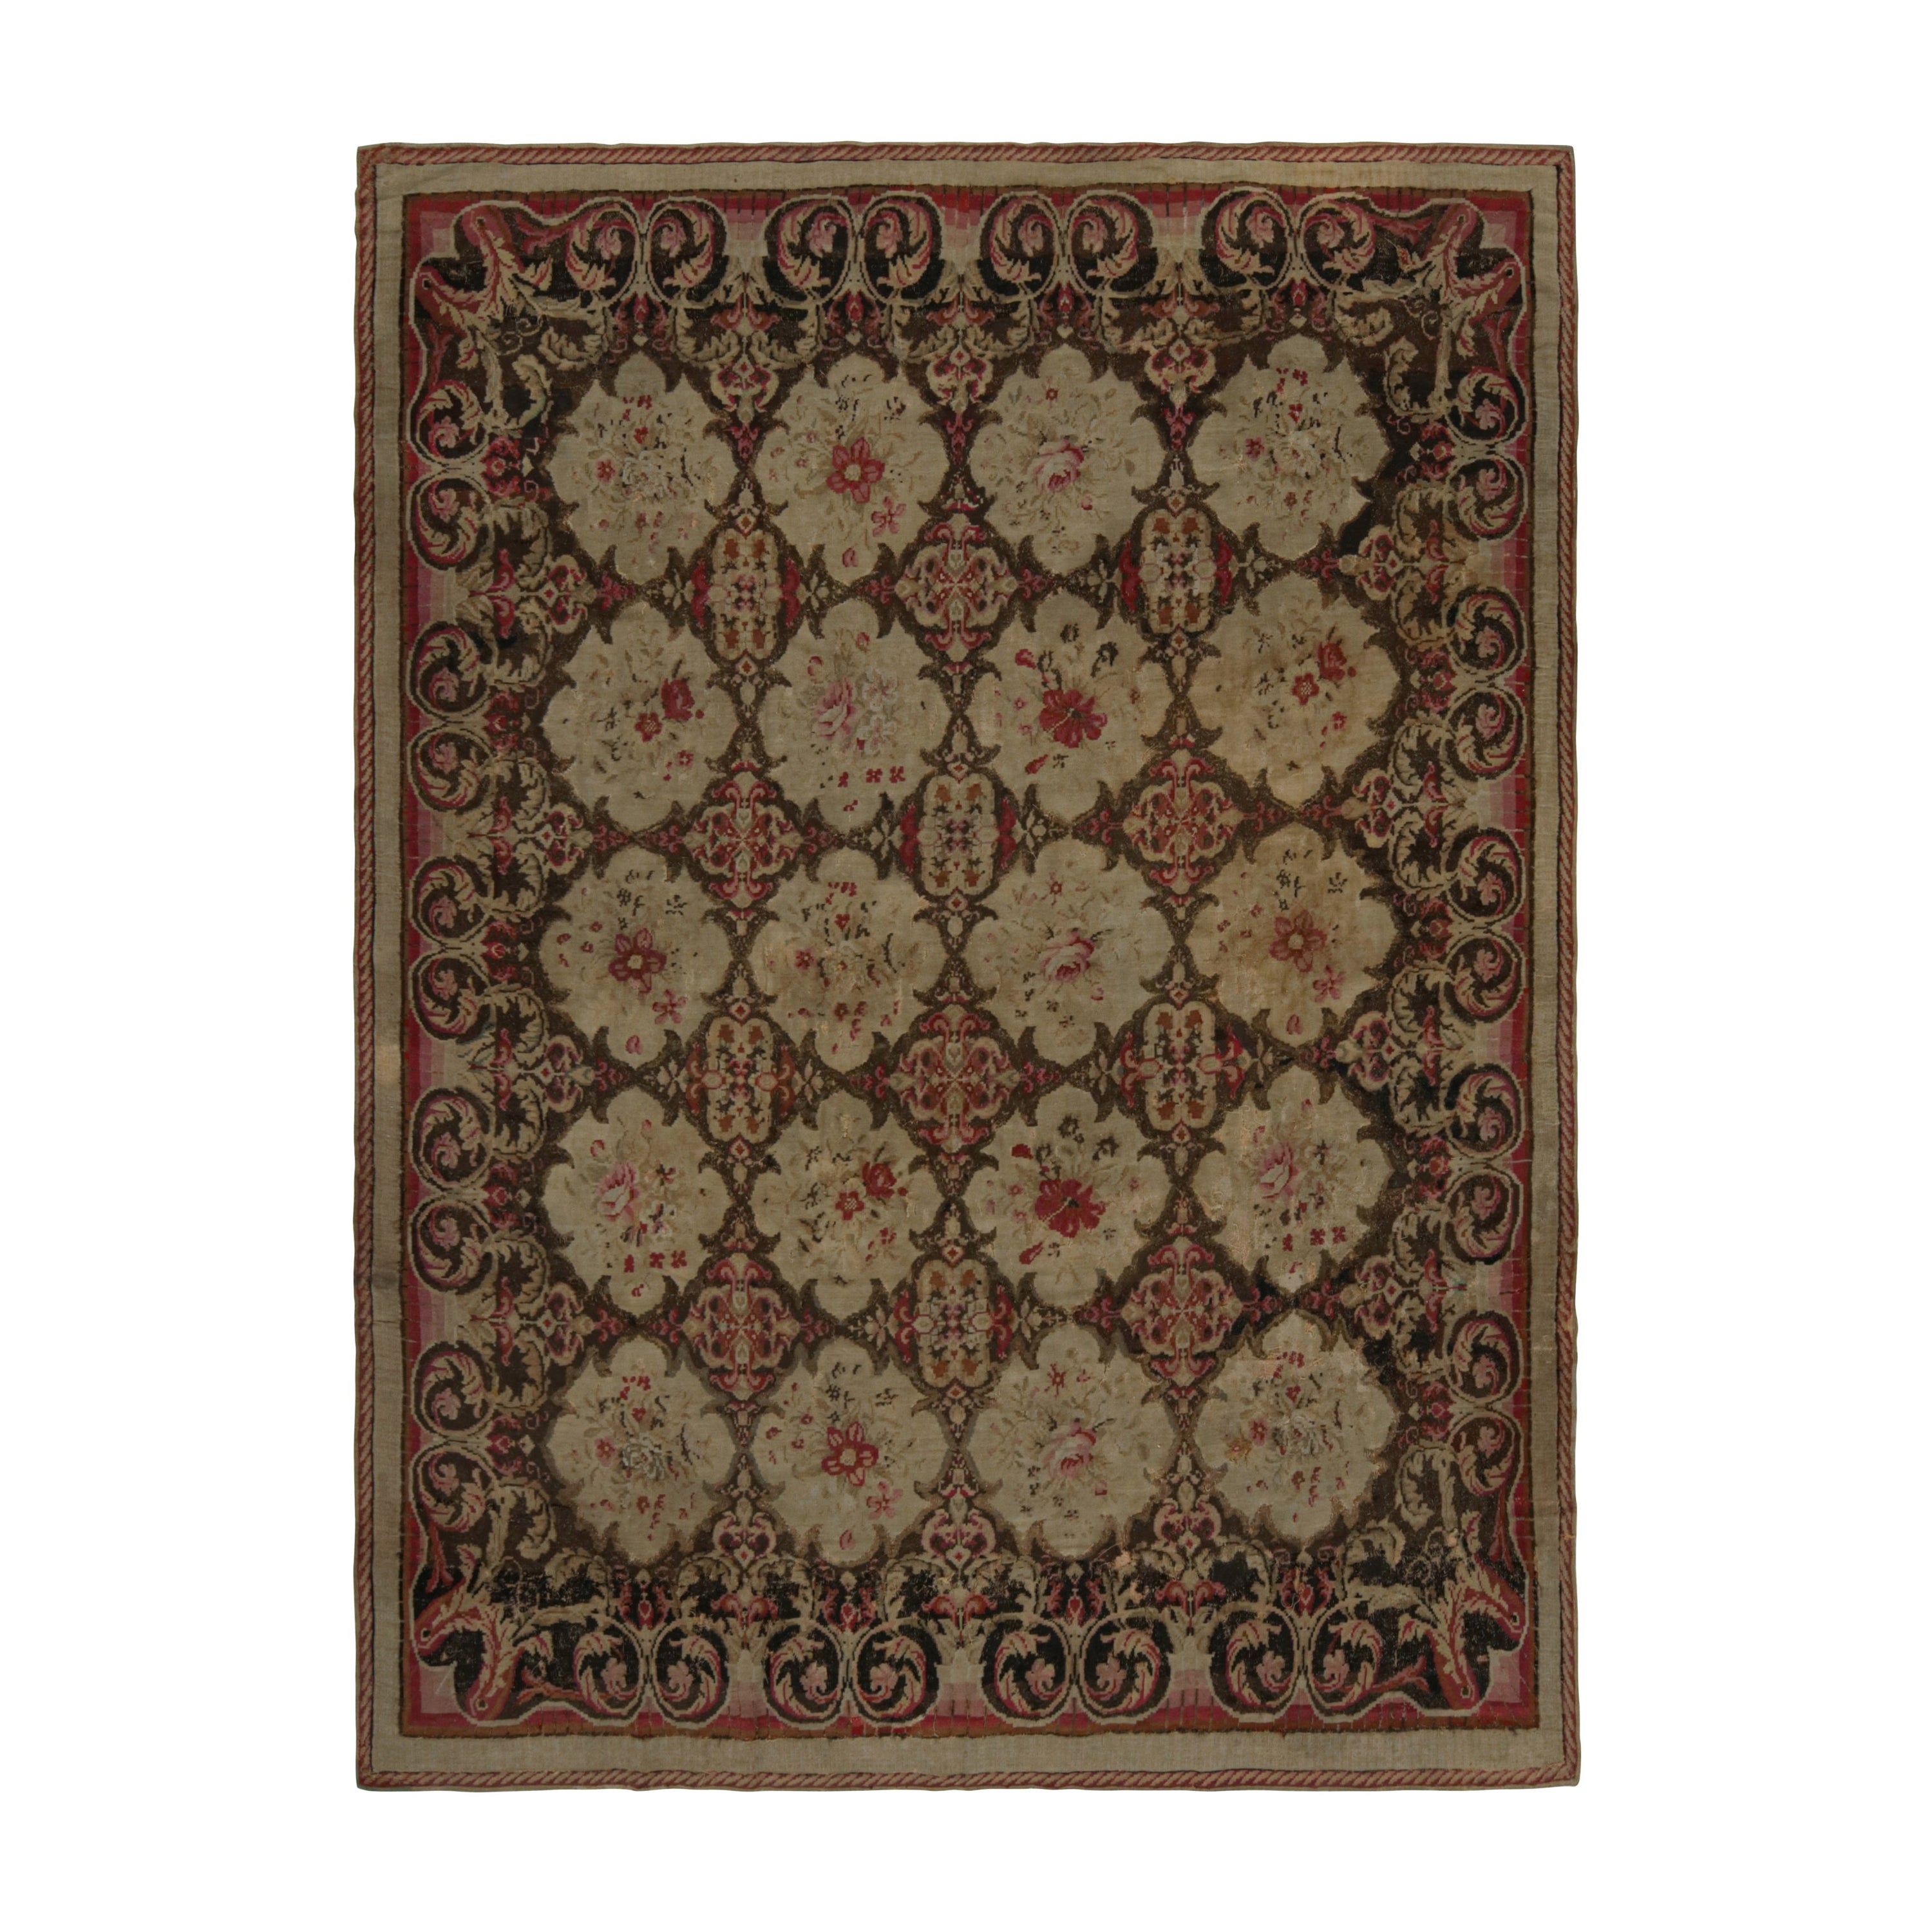 Antique Bessarabian Kilim rug in brown, with Floral patterns, from Rug & Kilim For Sale